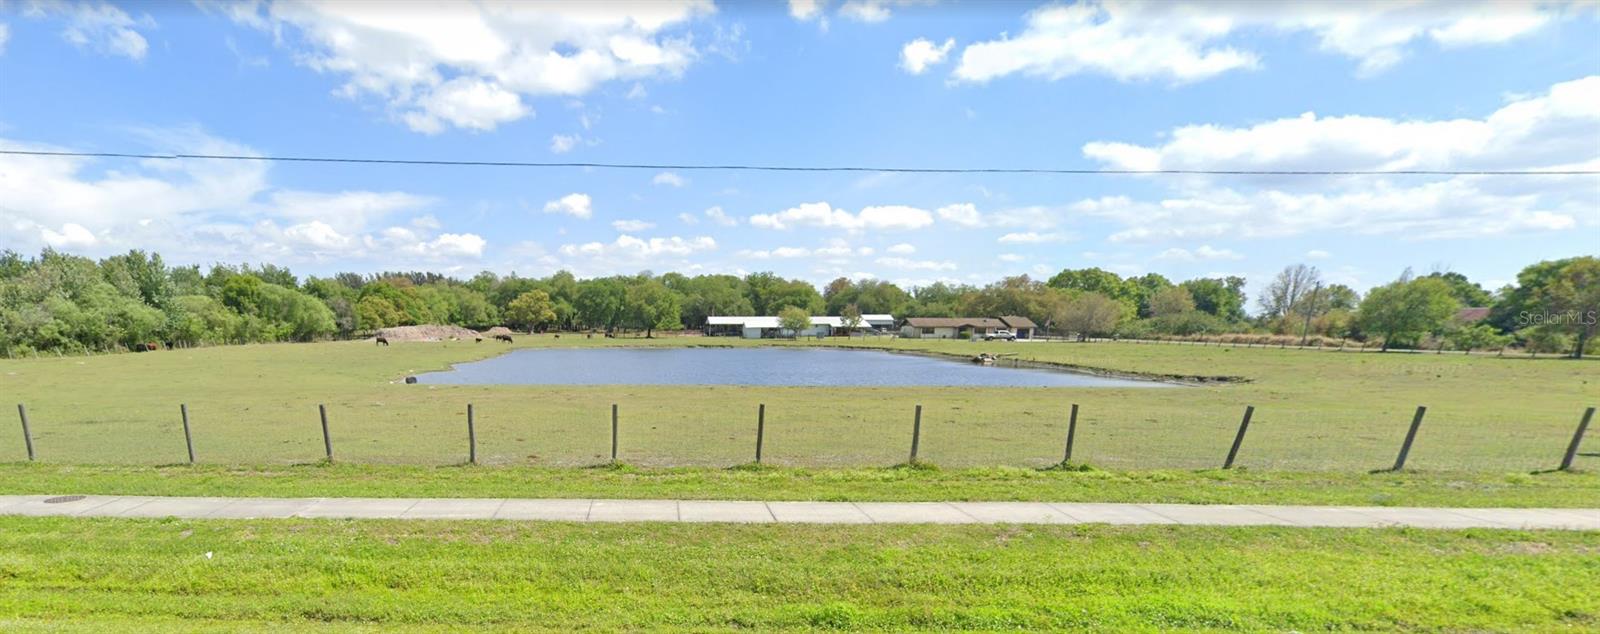 52 Single Family Home Plots For Sale in Kissimmee, FL